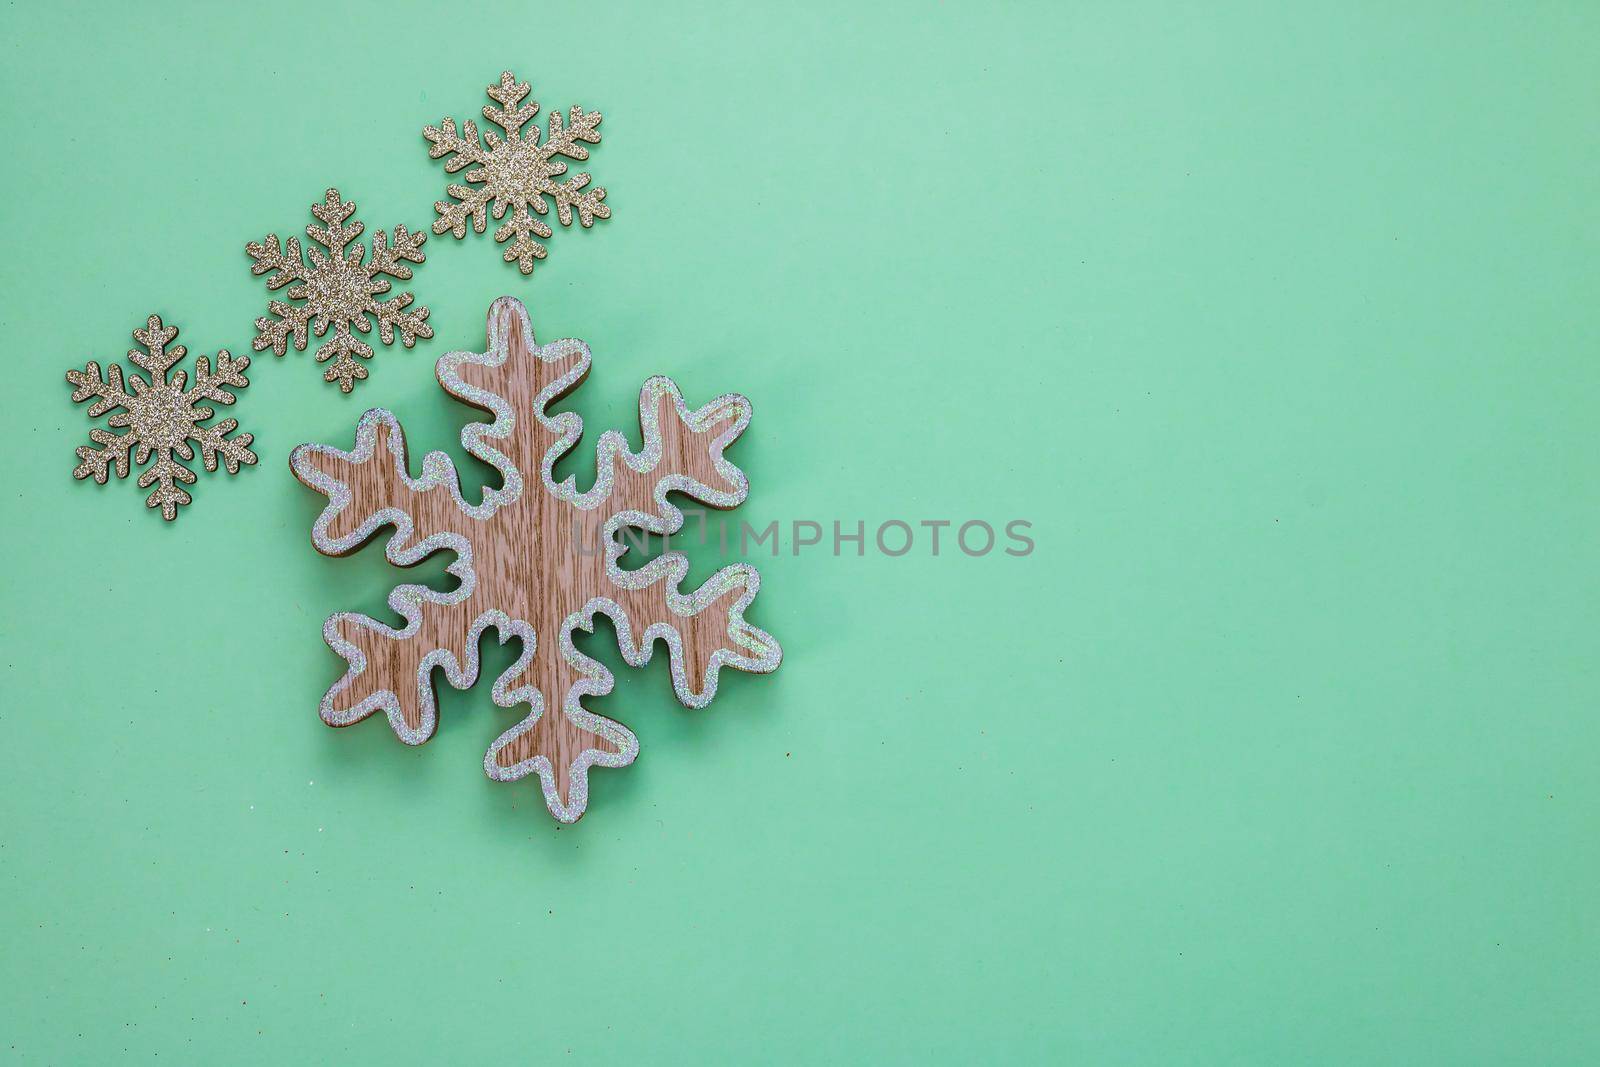 Glittery snowflakes decorations in a Christmas composition. Top view with copy space for december season